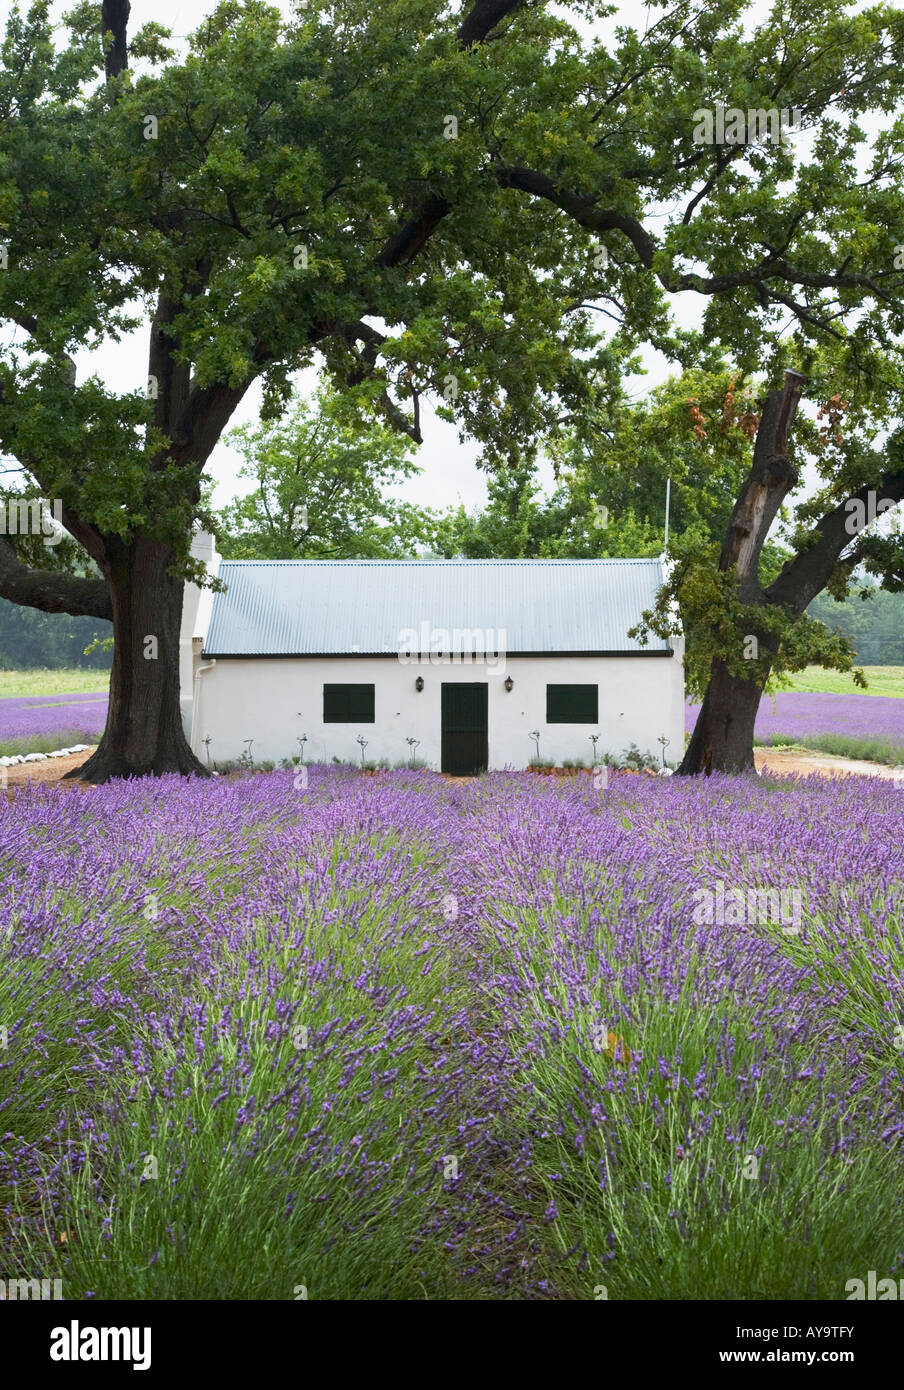 Farm Building and Oak Trees in field of Lavender Franshoek South Africa Stock Photo